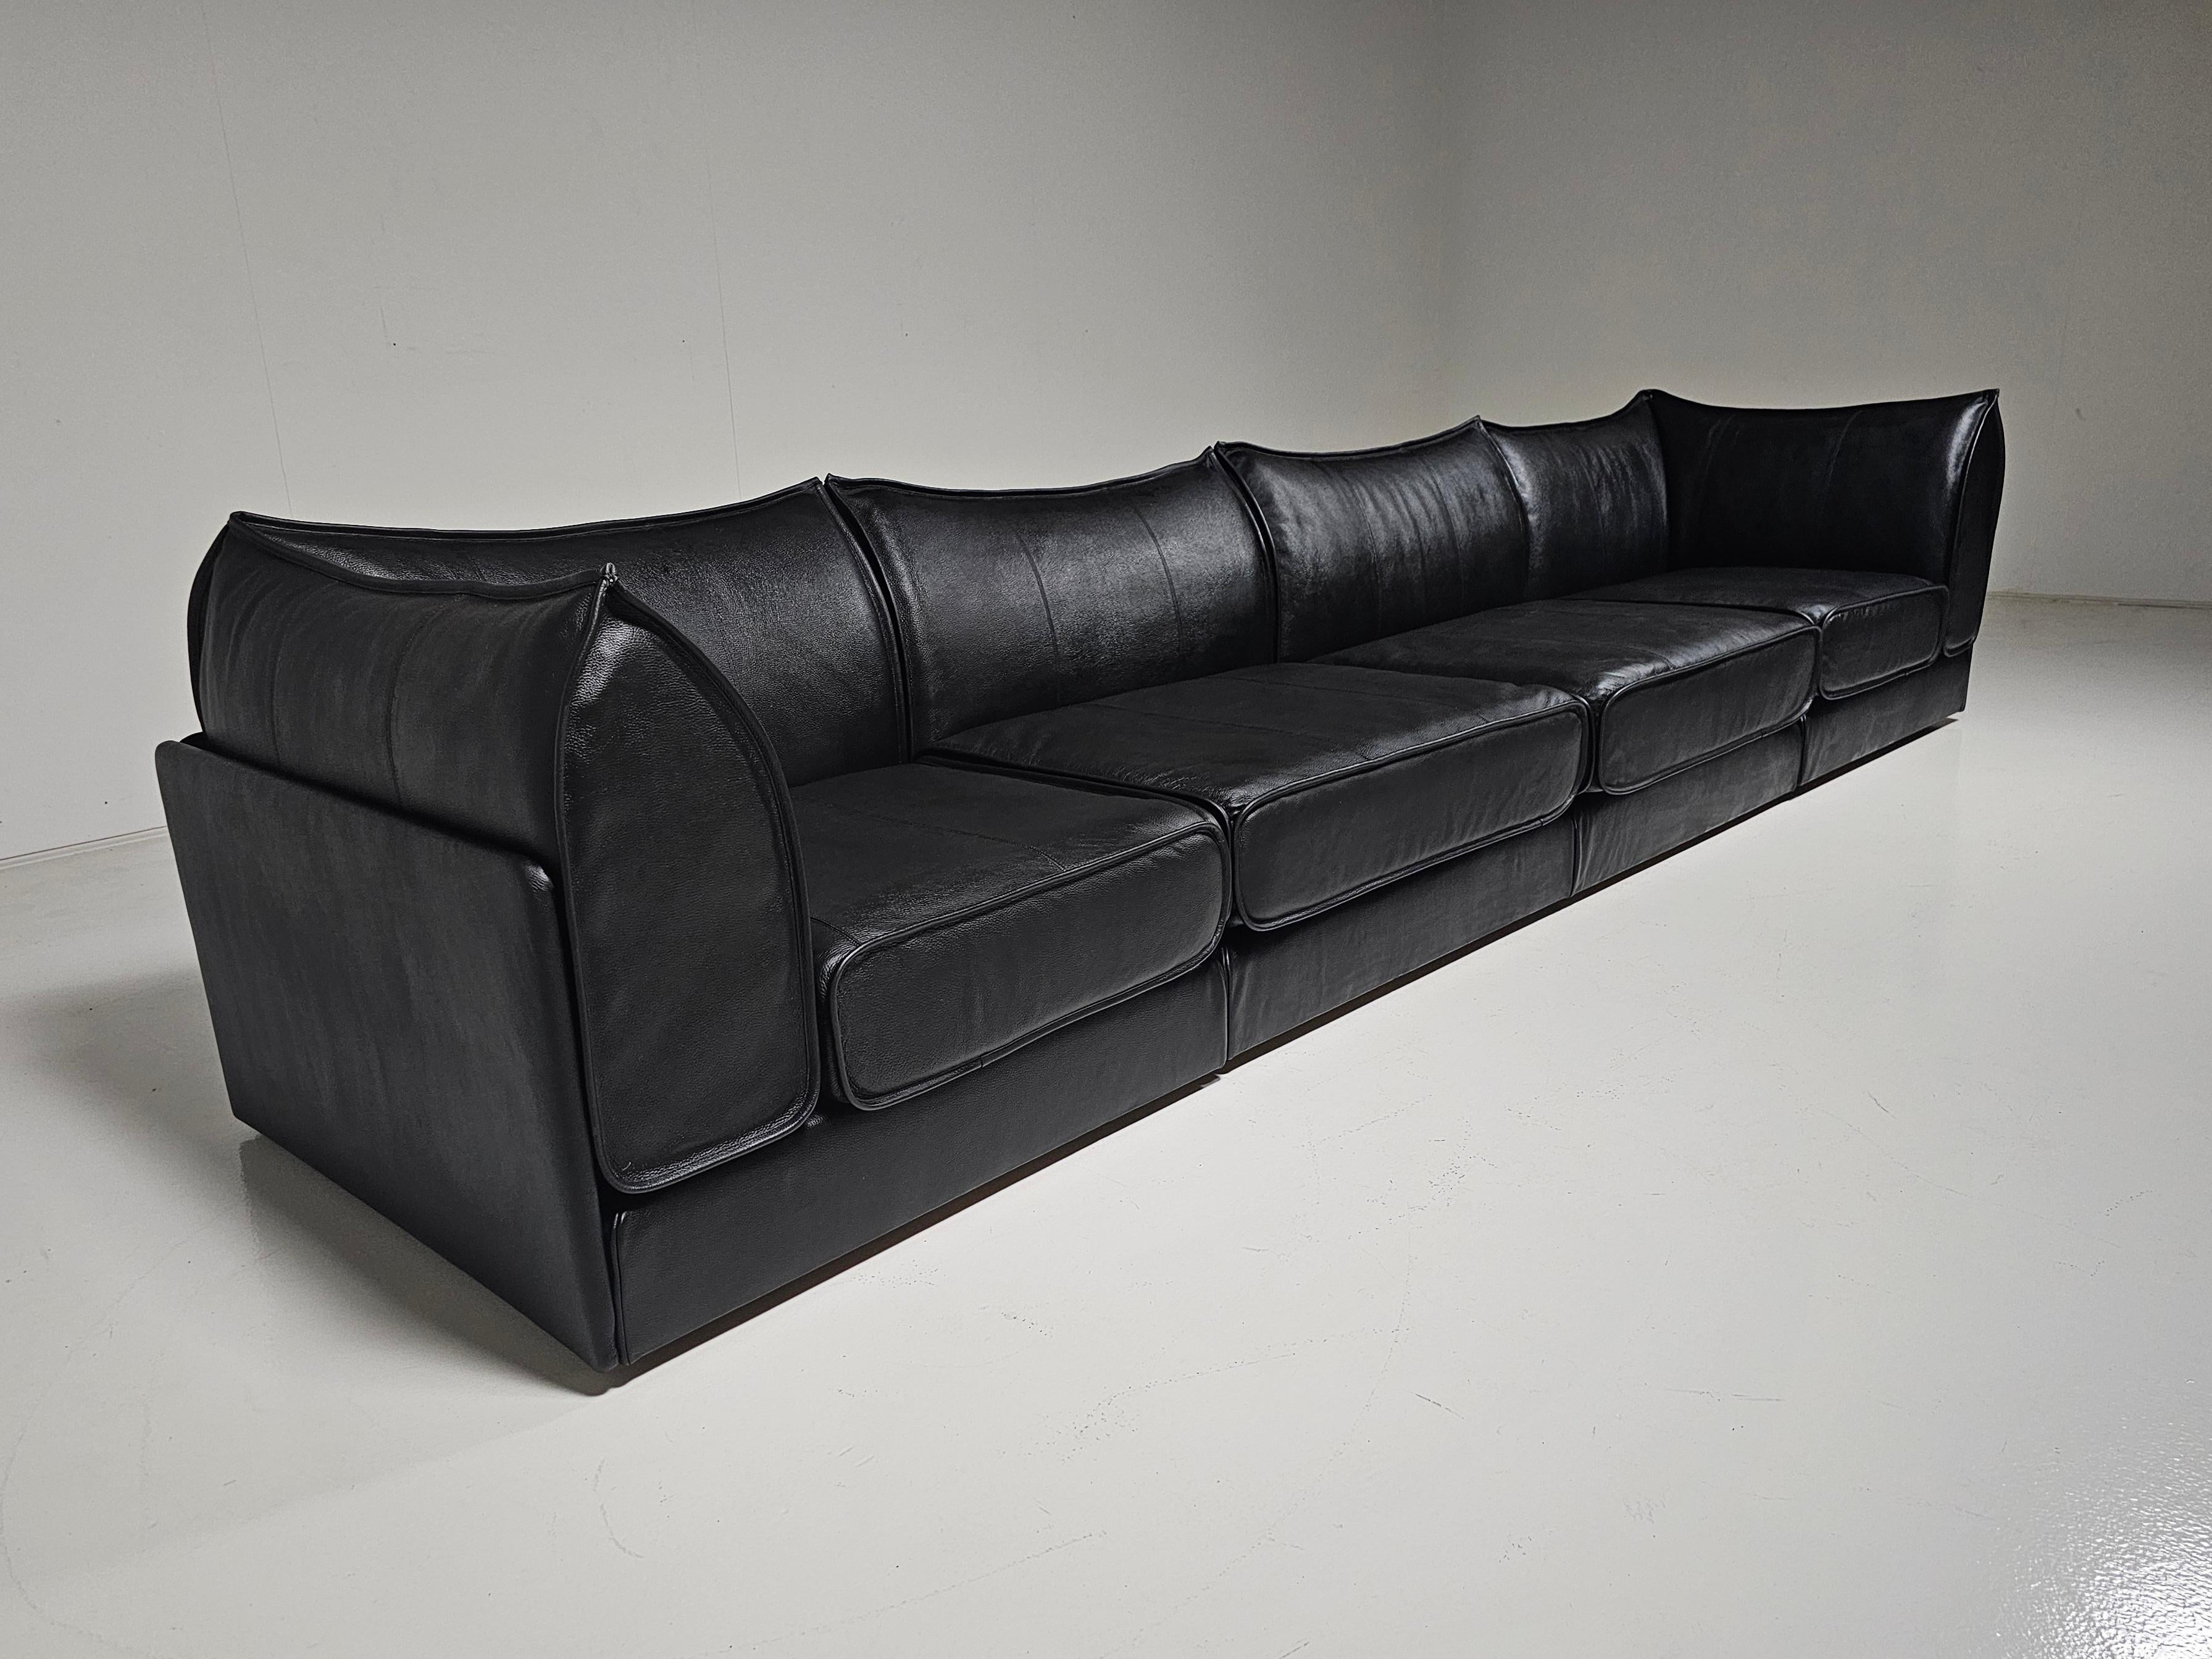 European De Sede DS-19 black leather 4-seater 'Pagoda' Sectional Sofa, 1970s For Sale